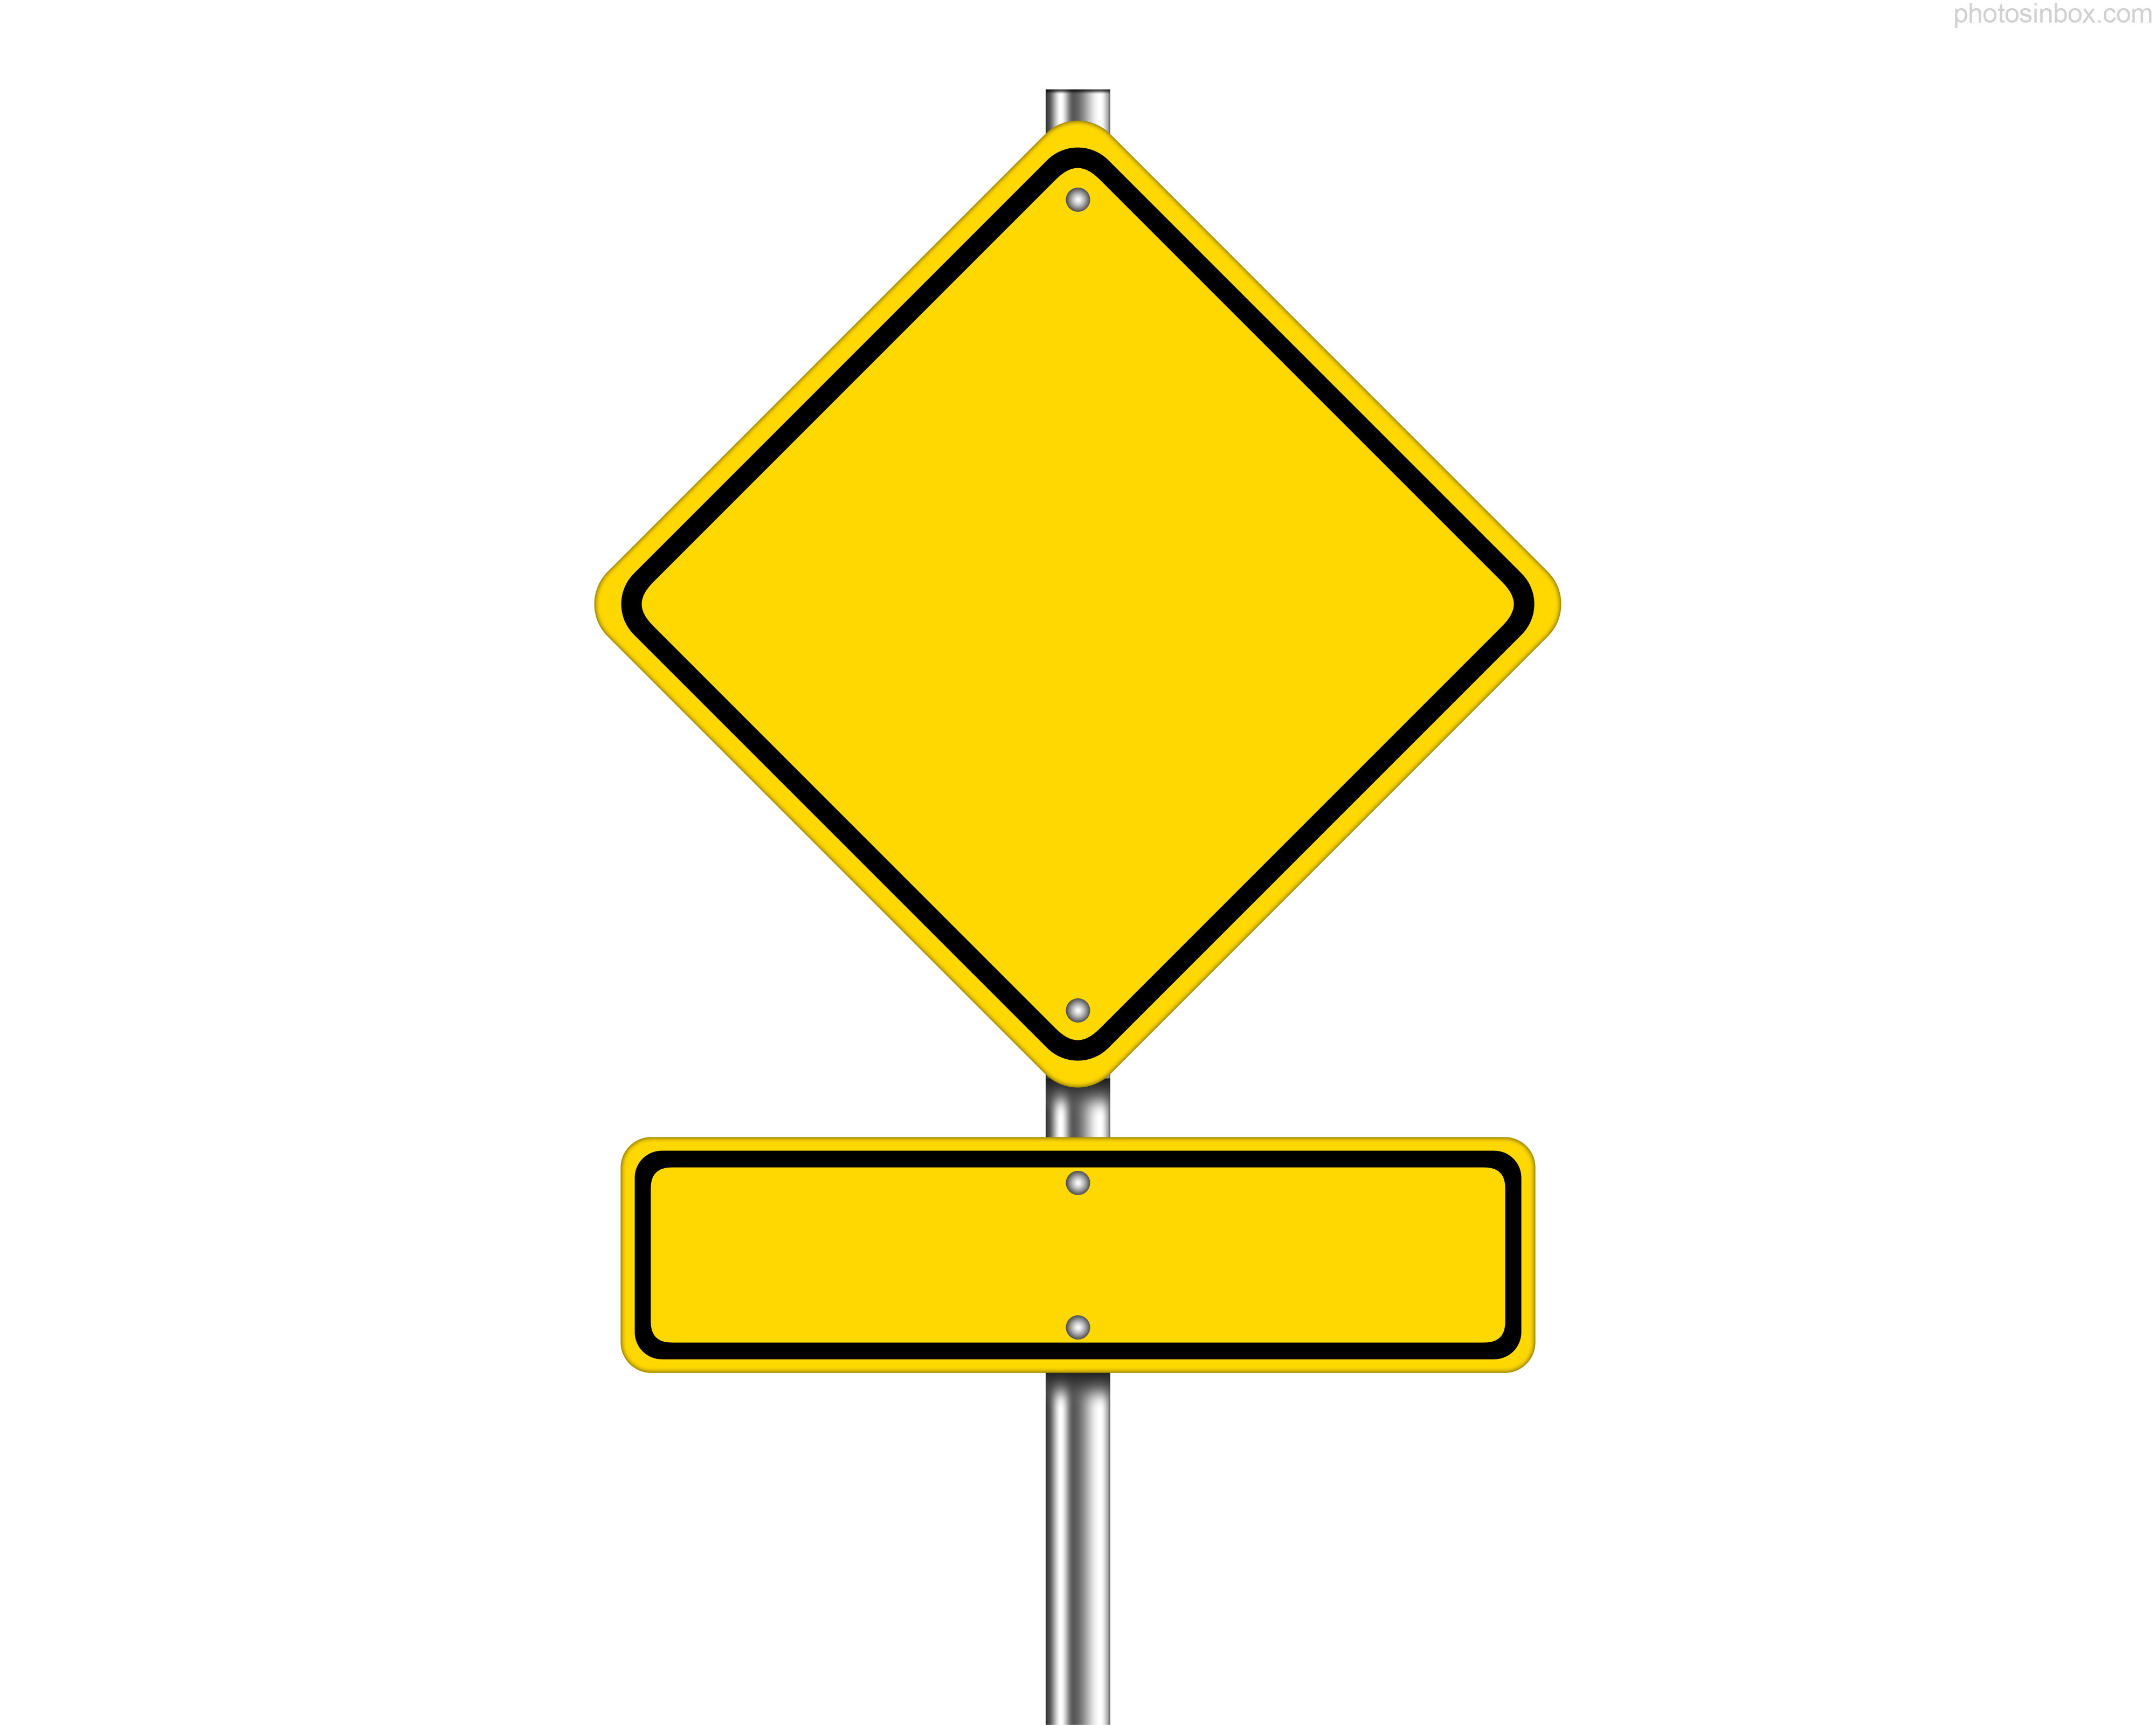 Blank Road Sign Clipart